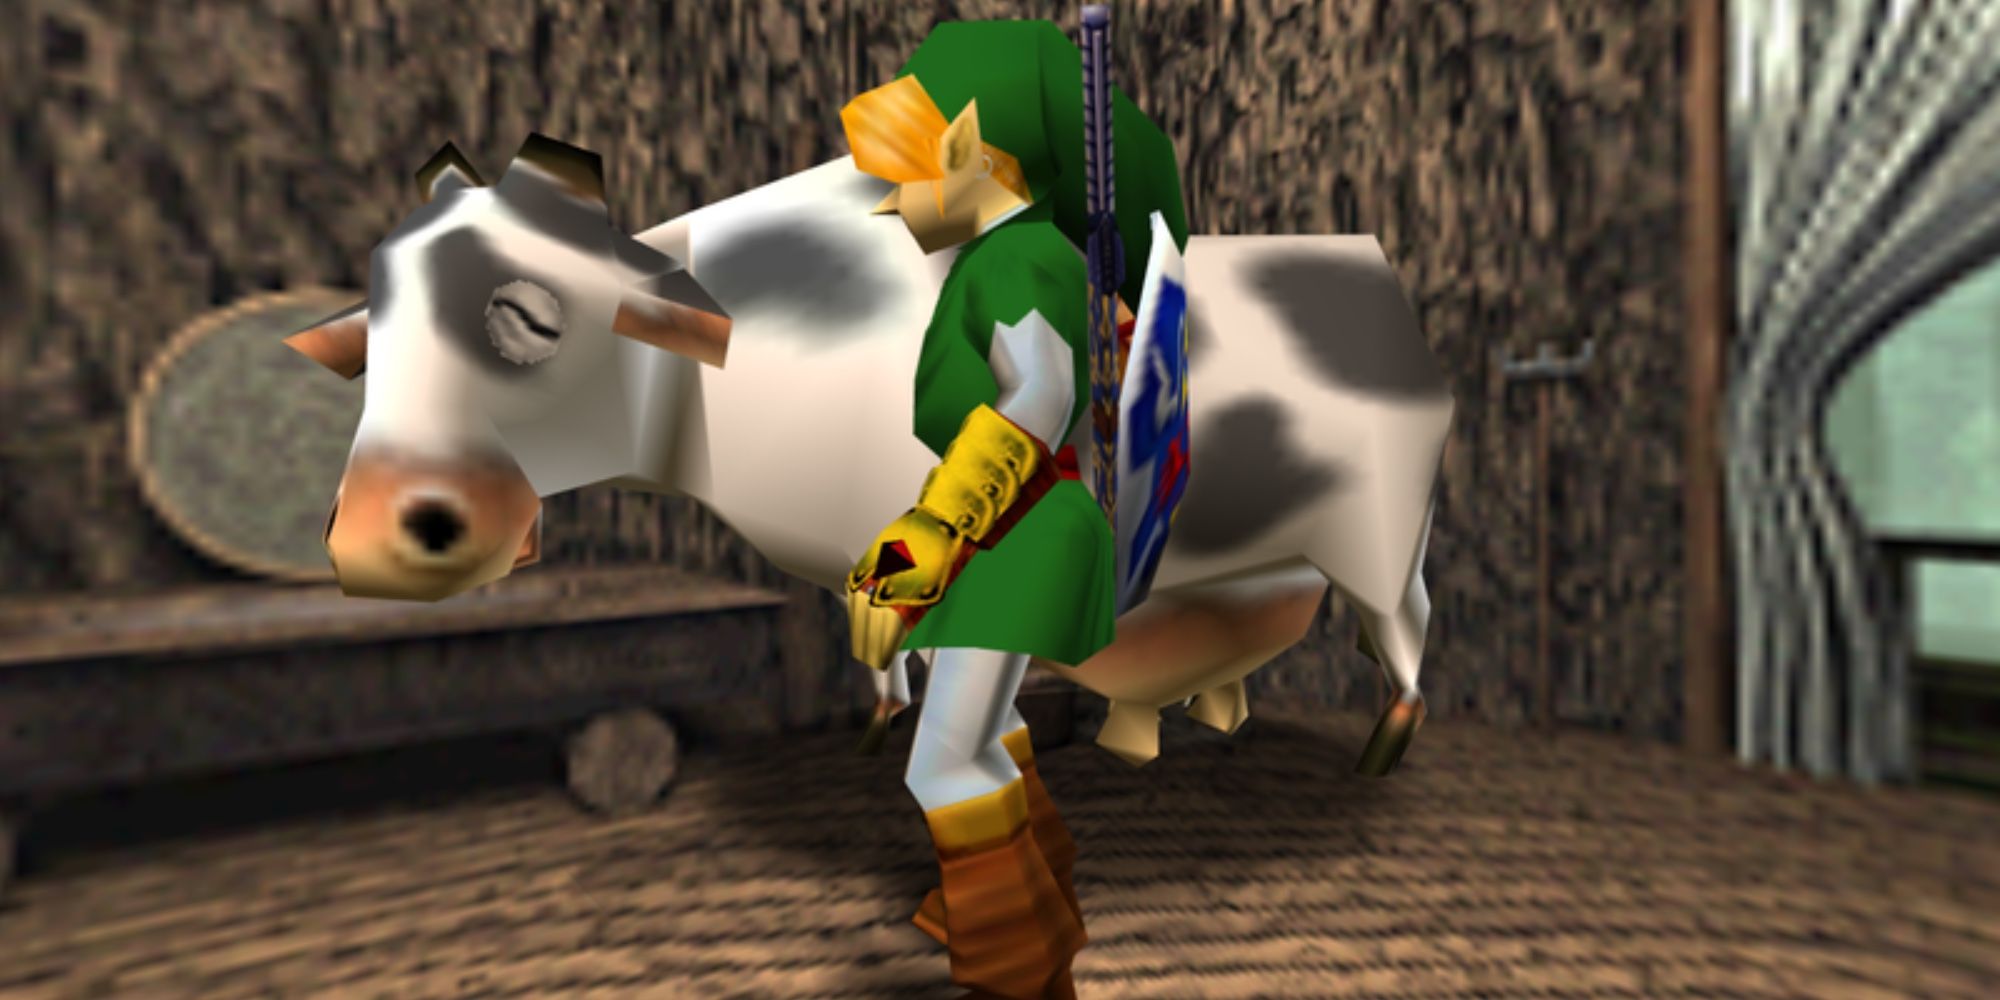 Link standing next to a cow.